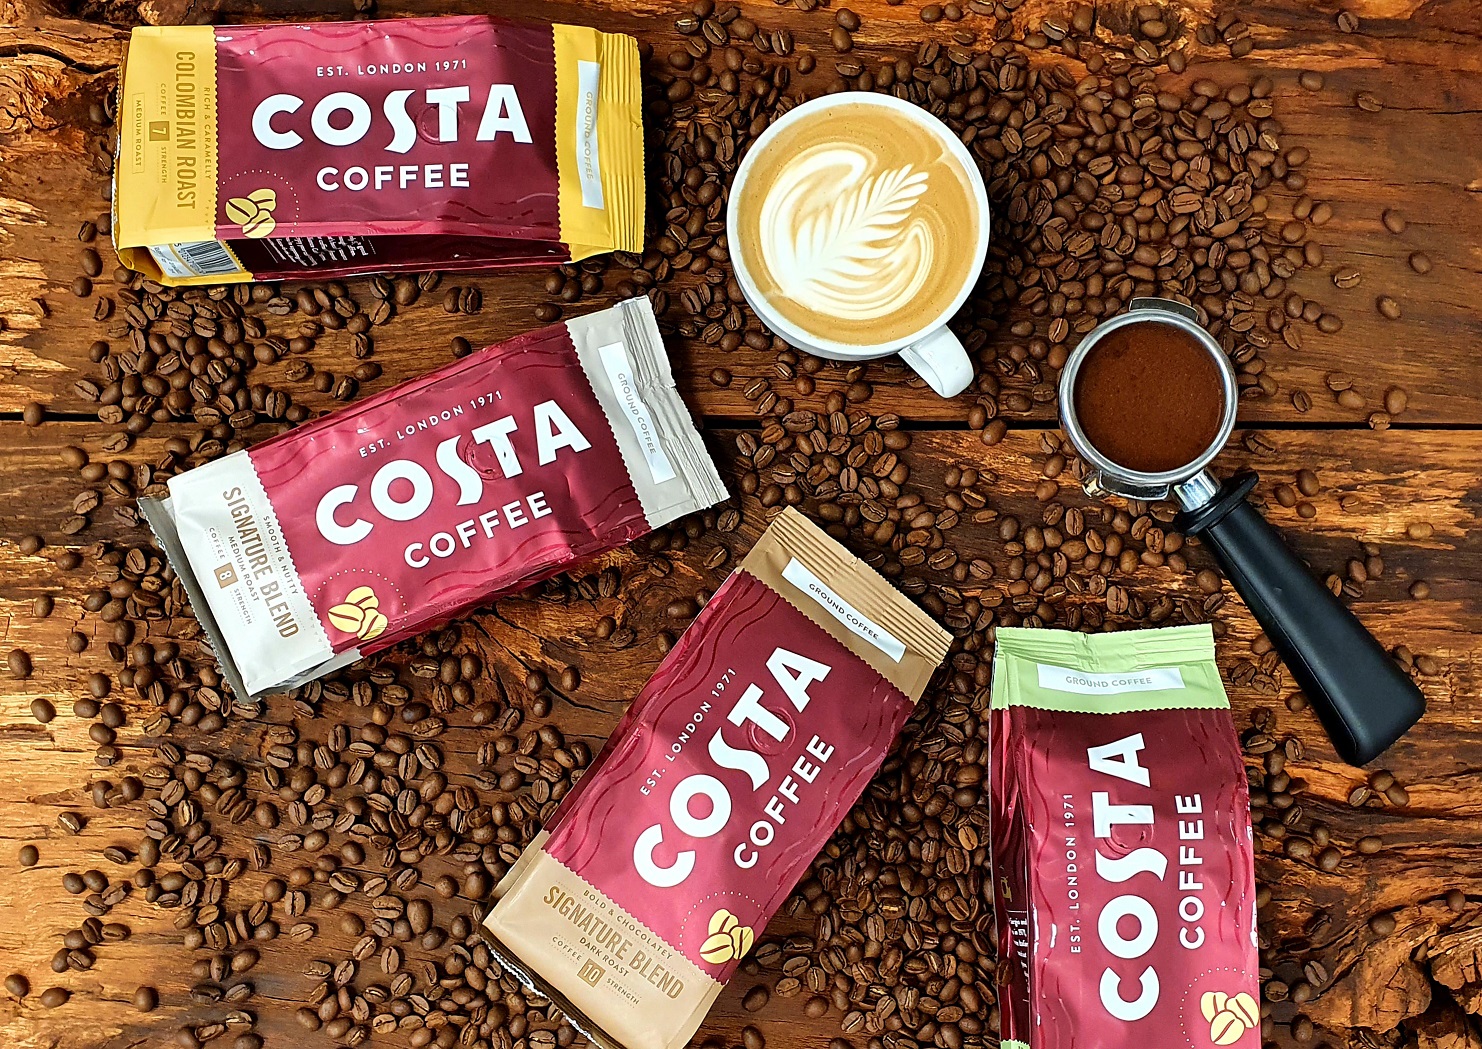 https://www.beveragedaily.com/var/wrbm_gb_food_pharma/storage/images/publications/food-beverage-nutrition/beveragedaily.com/news/manufacturers/coca-cola-launches-new-range-of-at-home-costa-coffee-products/11425504-1-eng-GB/Coca-Cola-launches-new-range-of-at-home-Costa-Coffee-products.jpg